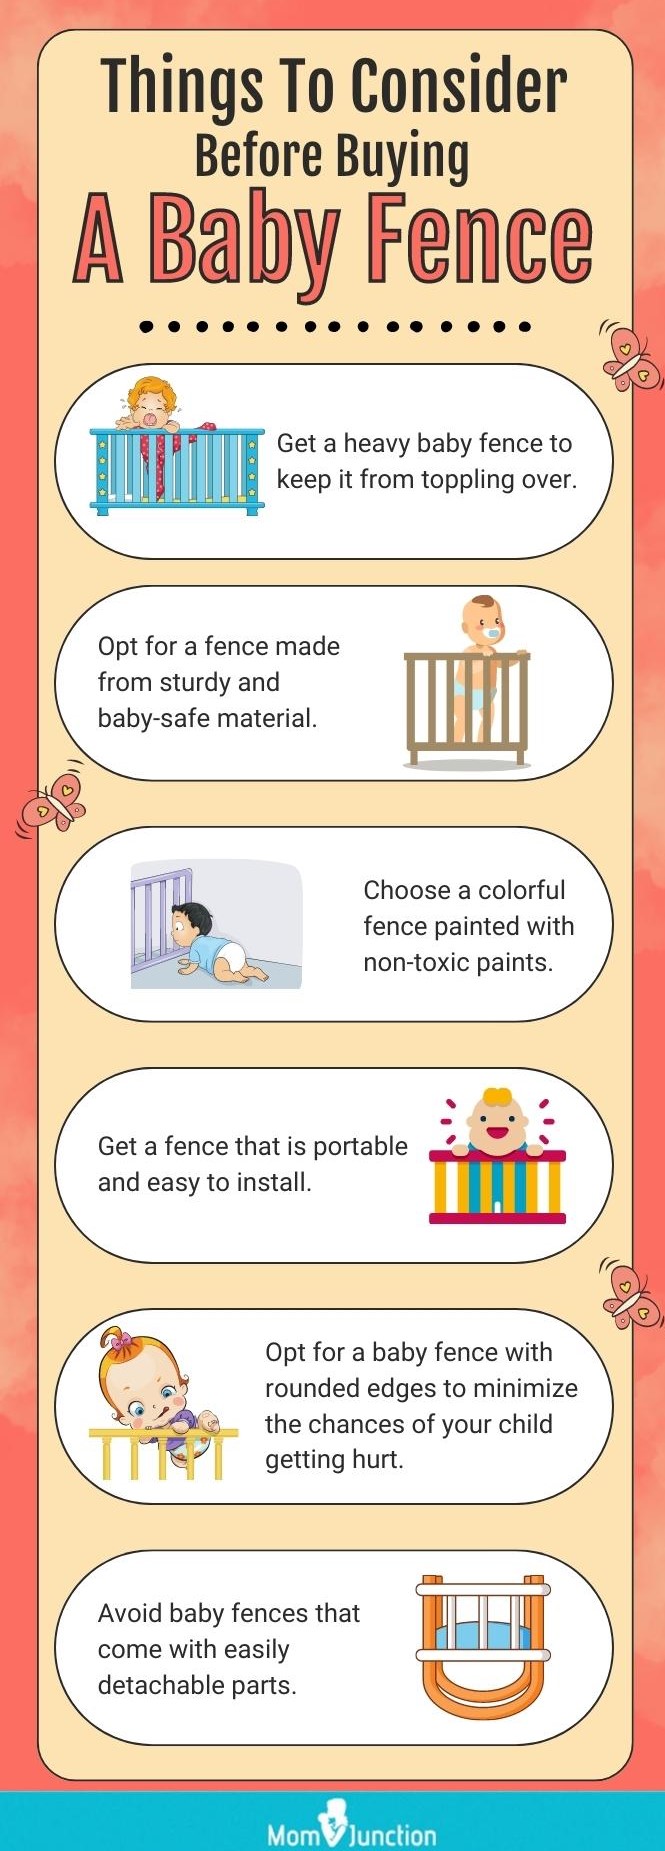 Things To Consider Before Buying A Baby Fence (infographic)